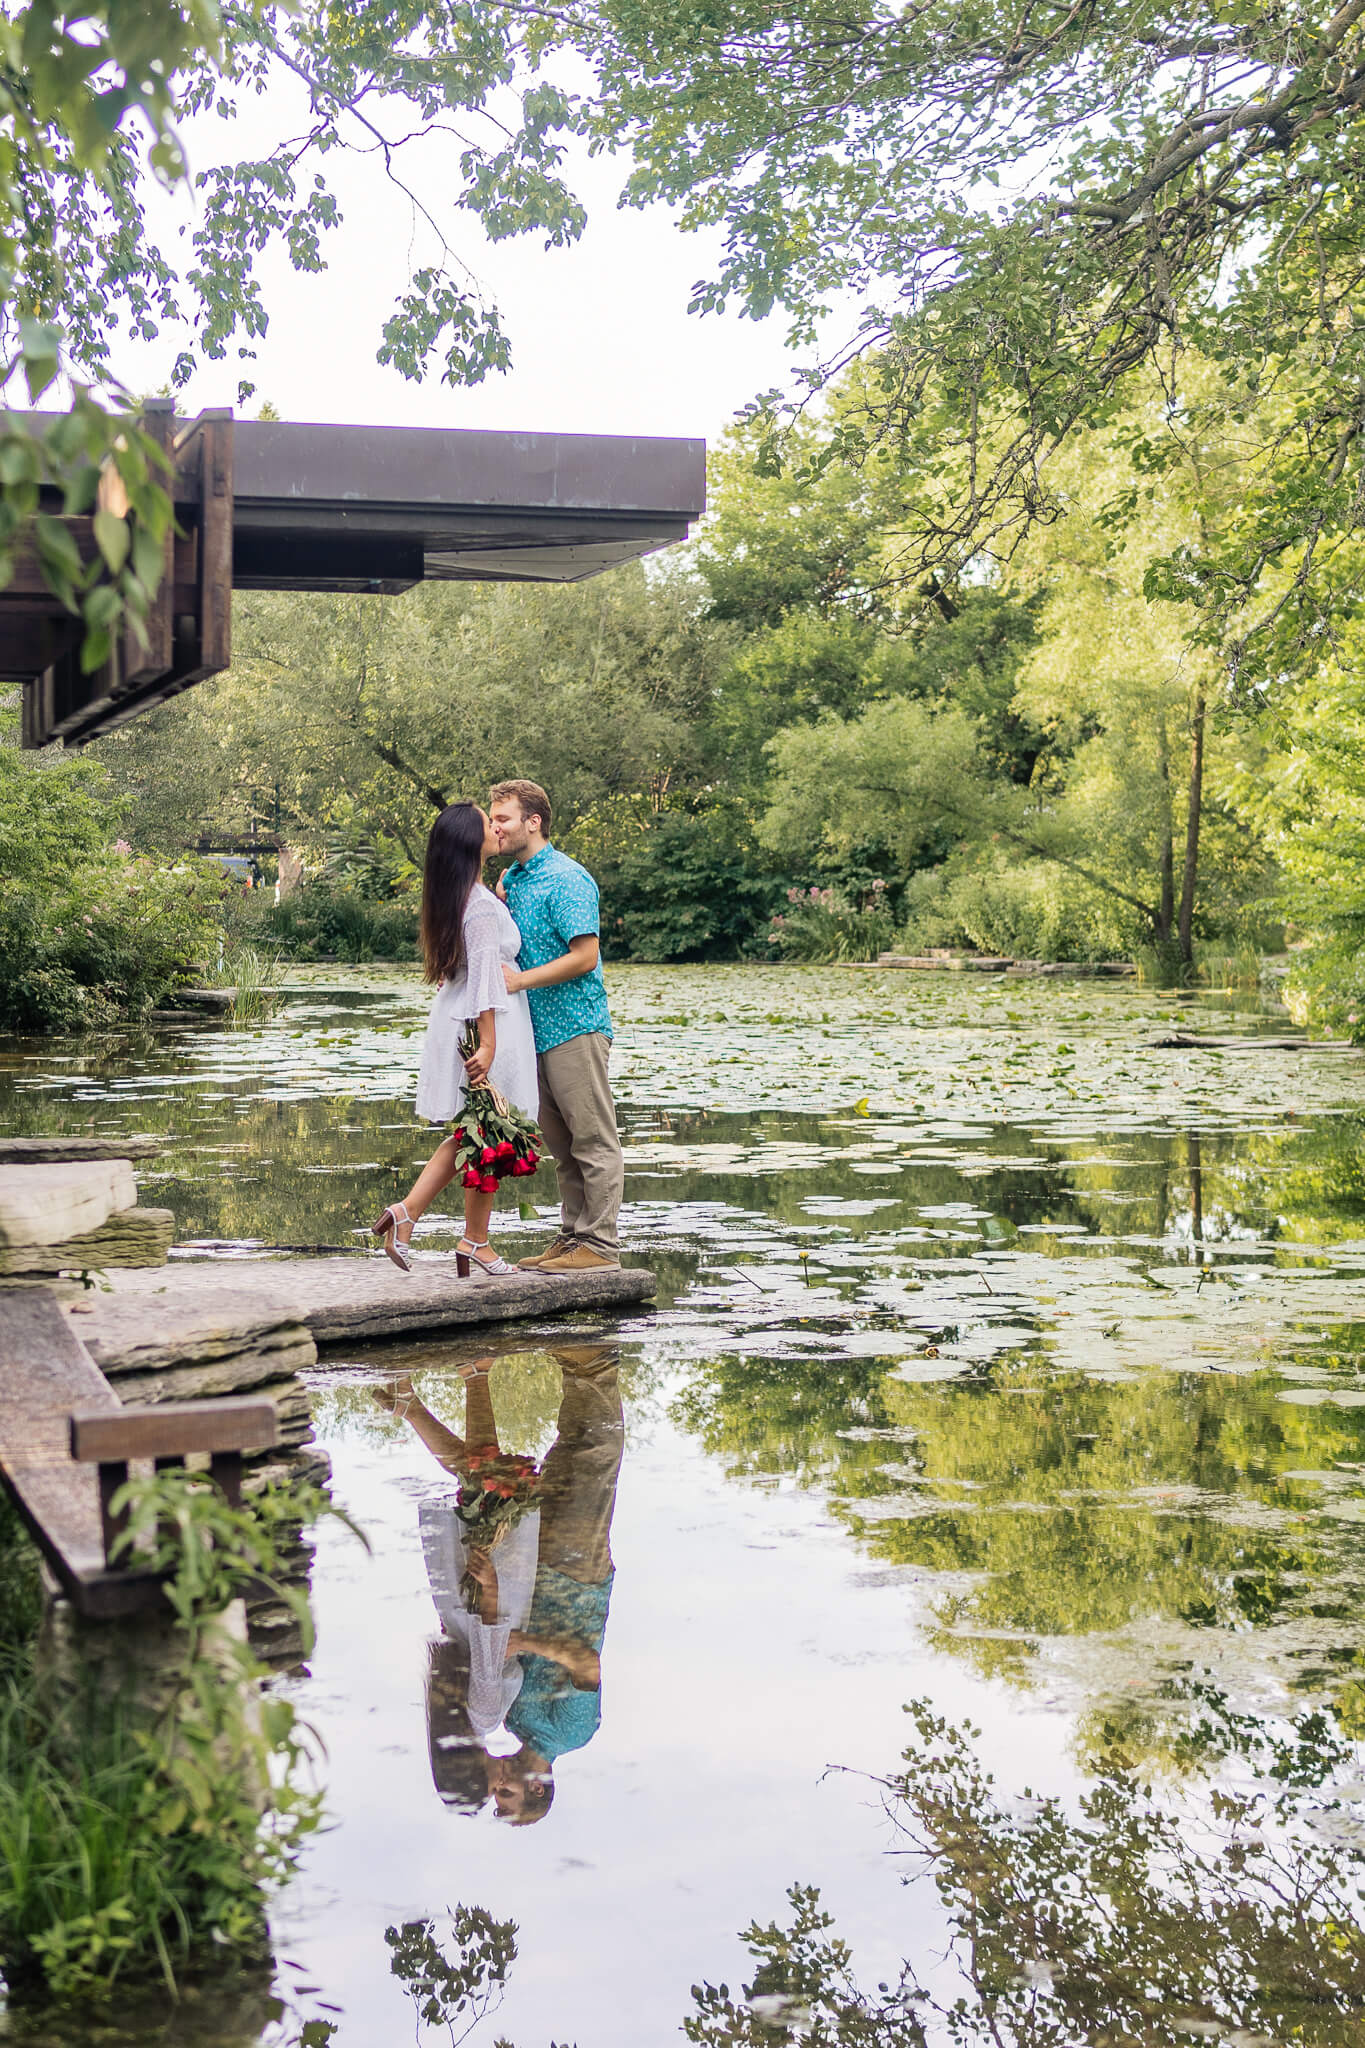 A woman kisses a man and pops her foot up. The couple is standing in the middle of the pond on a rock.